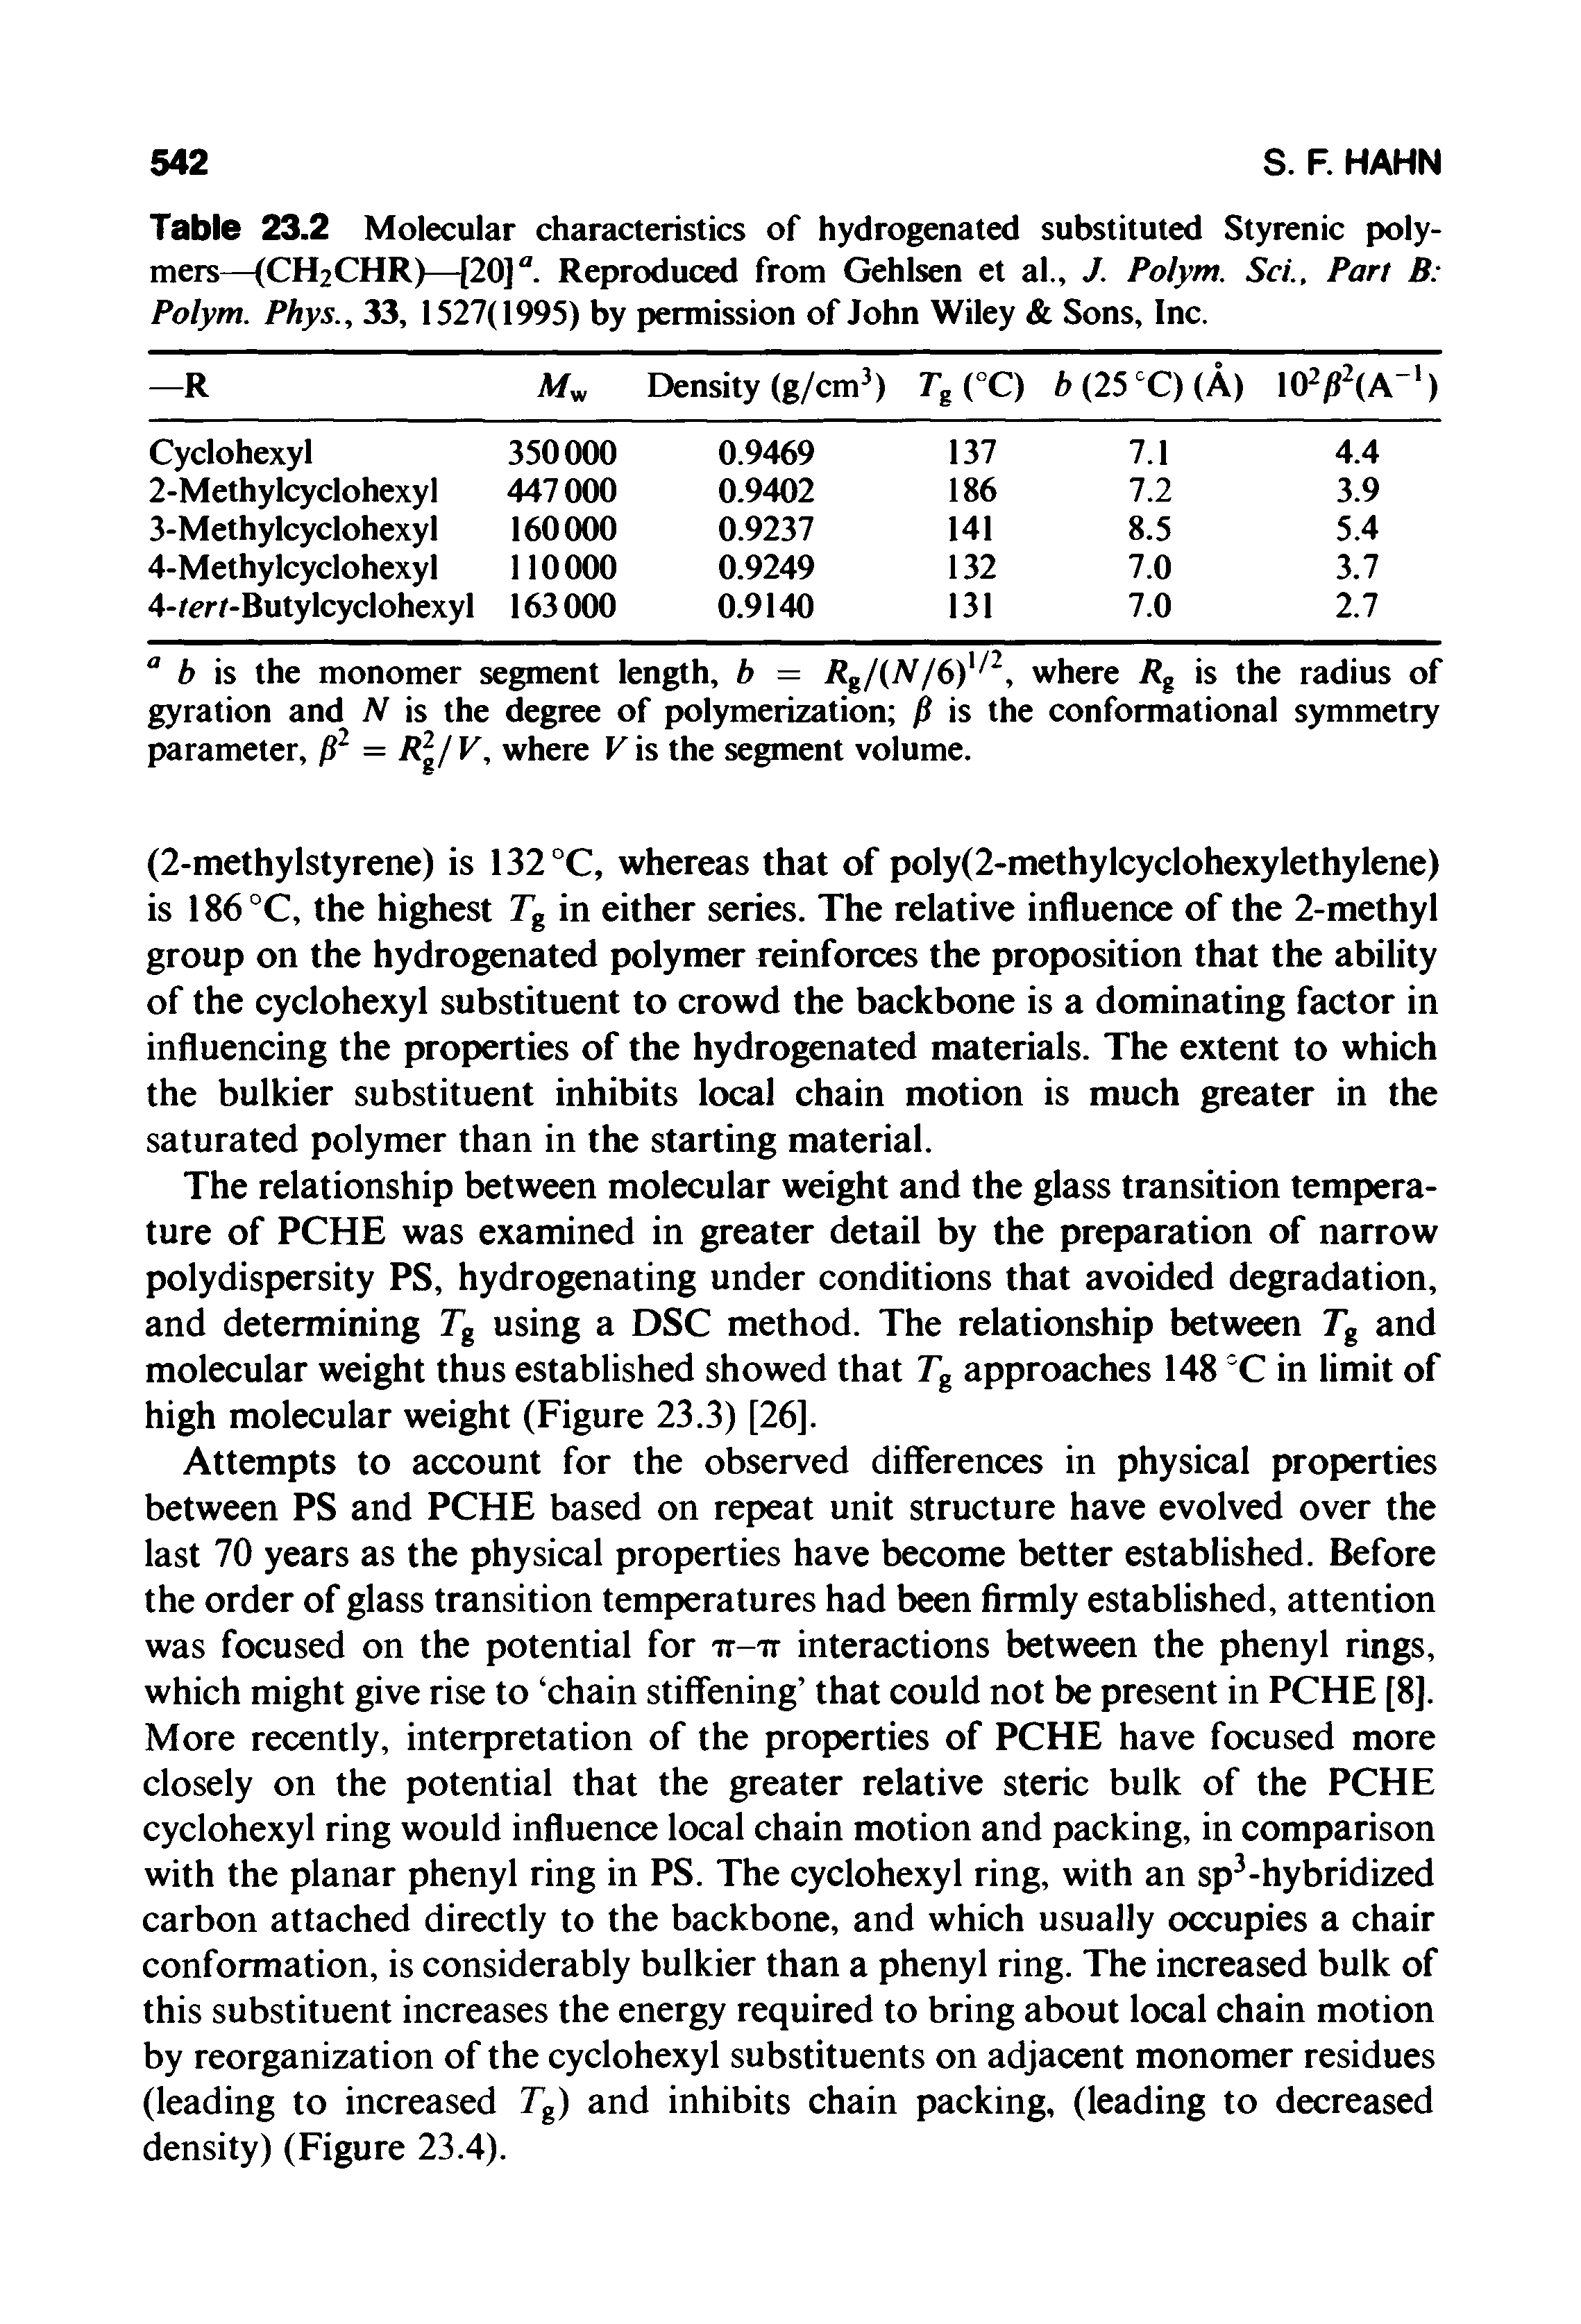 Table 23.2 Molecular characteristics of hydrogenated substituted Styrenic polymers—(CH2CHR)—[20]". Reproduced from Gehlsen et al., J. Polym. Sci., Part B Polym. Phys., 33, 1527(1995) by permission of John Wiley Sons, Inc.